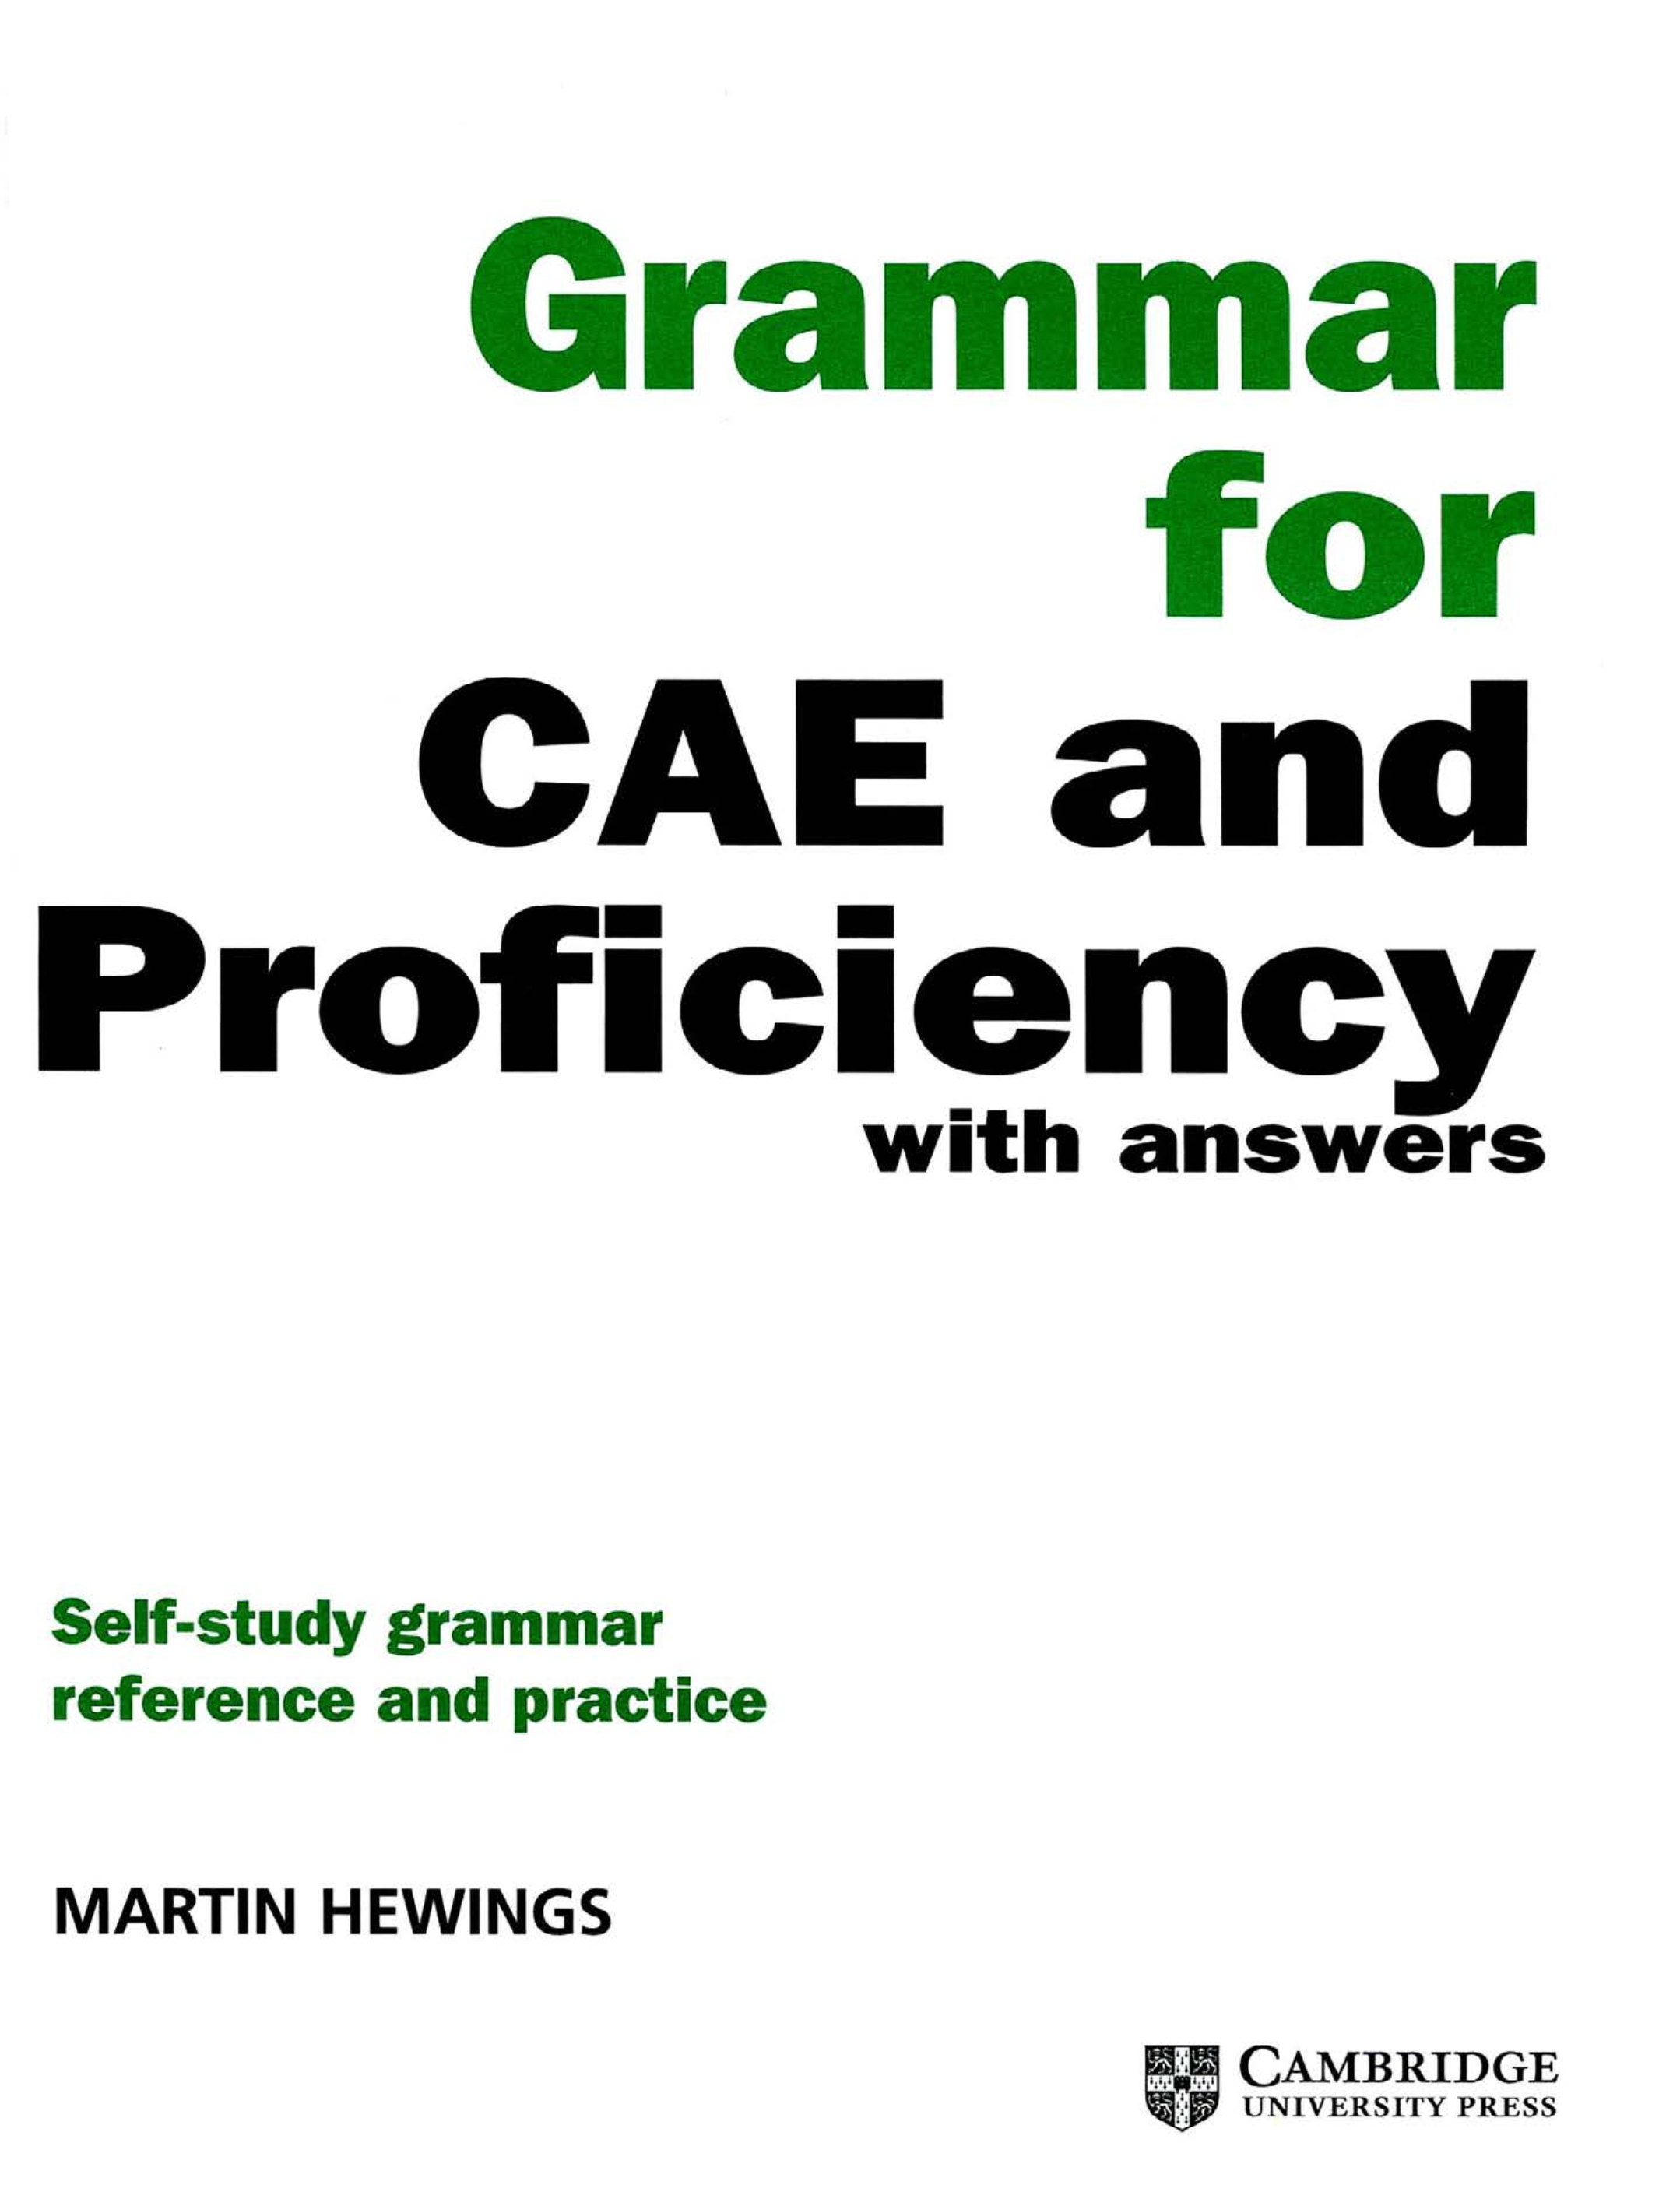 585  Grammar For CAE And Proficiency With Answers_Hewings Martin_2009, 296p_Page2